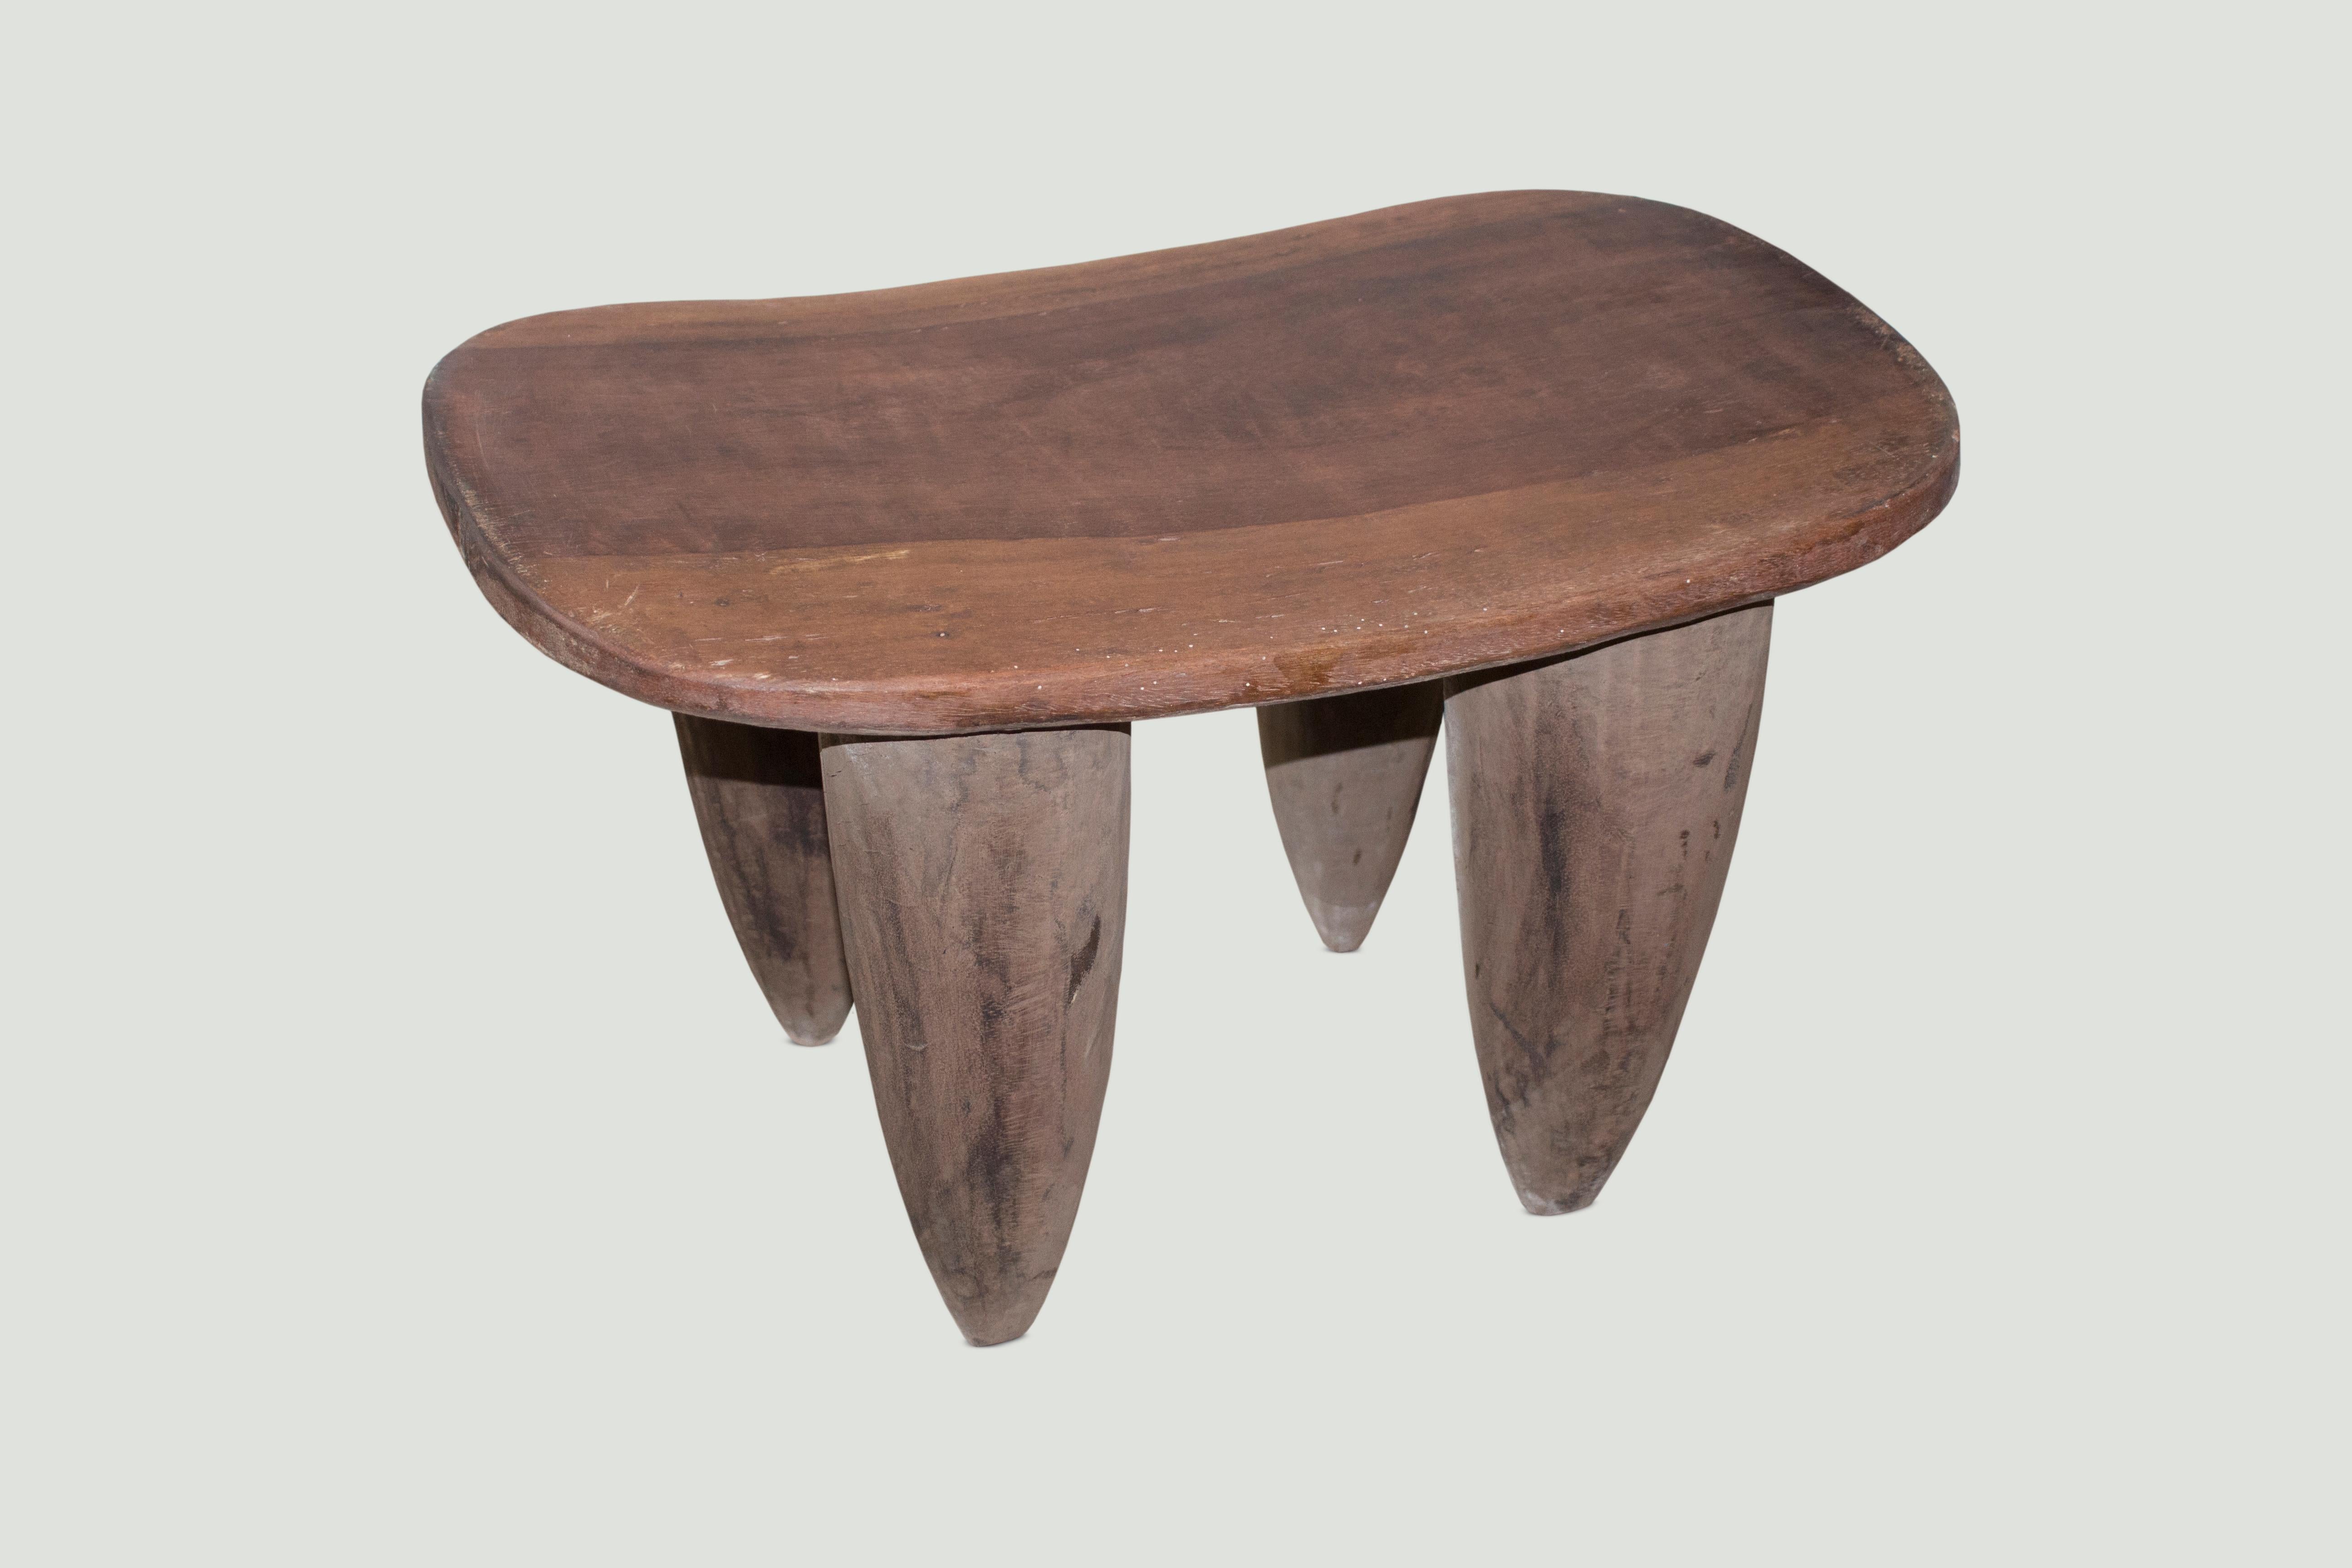 Antique side table or stool carved from a single piece of mahogany wood.

This side table or stool was sourced in the spirit of wabi-sabi, a Japanese philosophy that beauty can be found in imperfection and impermanence. It’s a beauty of things